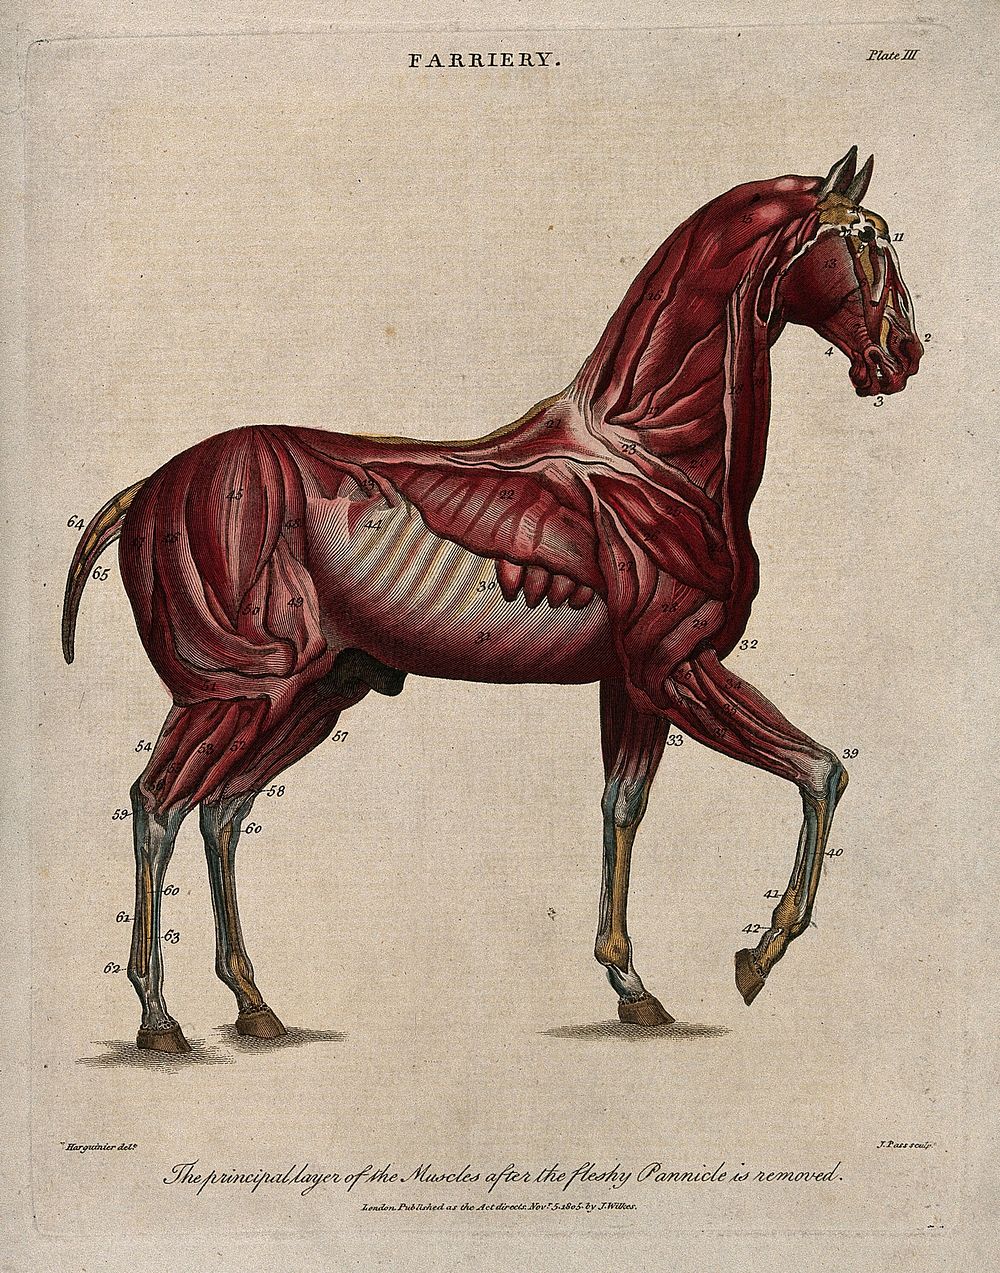 An écorché horse: side view, showing the outer layer of the muscles. Coloured engraving by J. Pass after Harguinier, 1805.